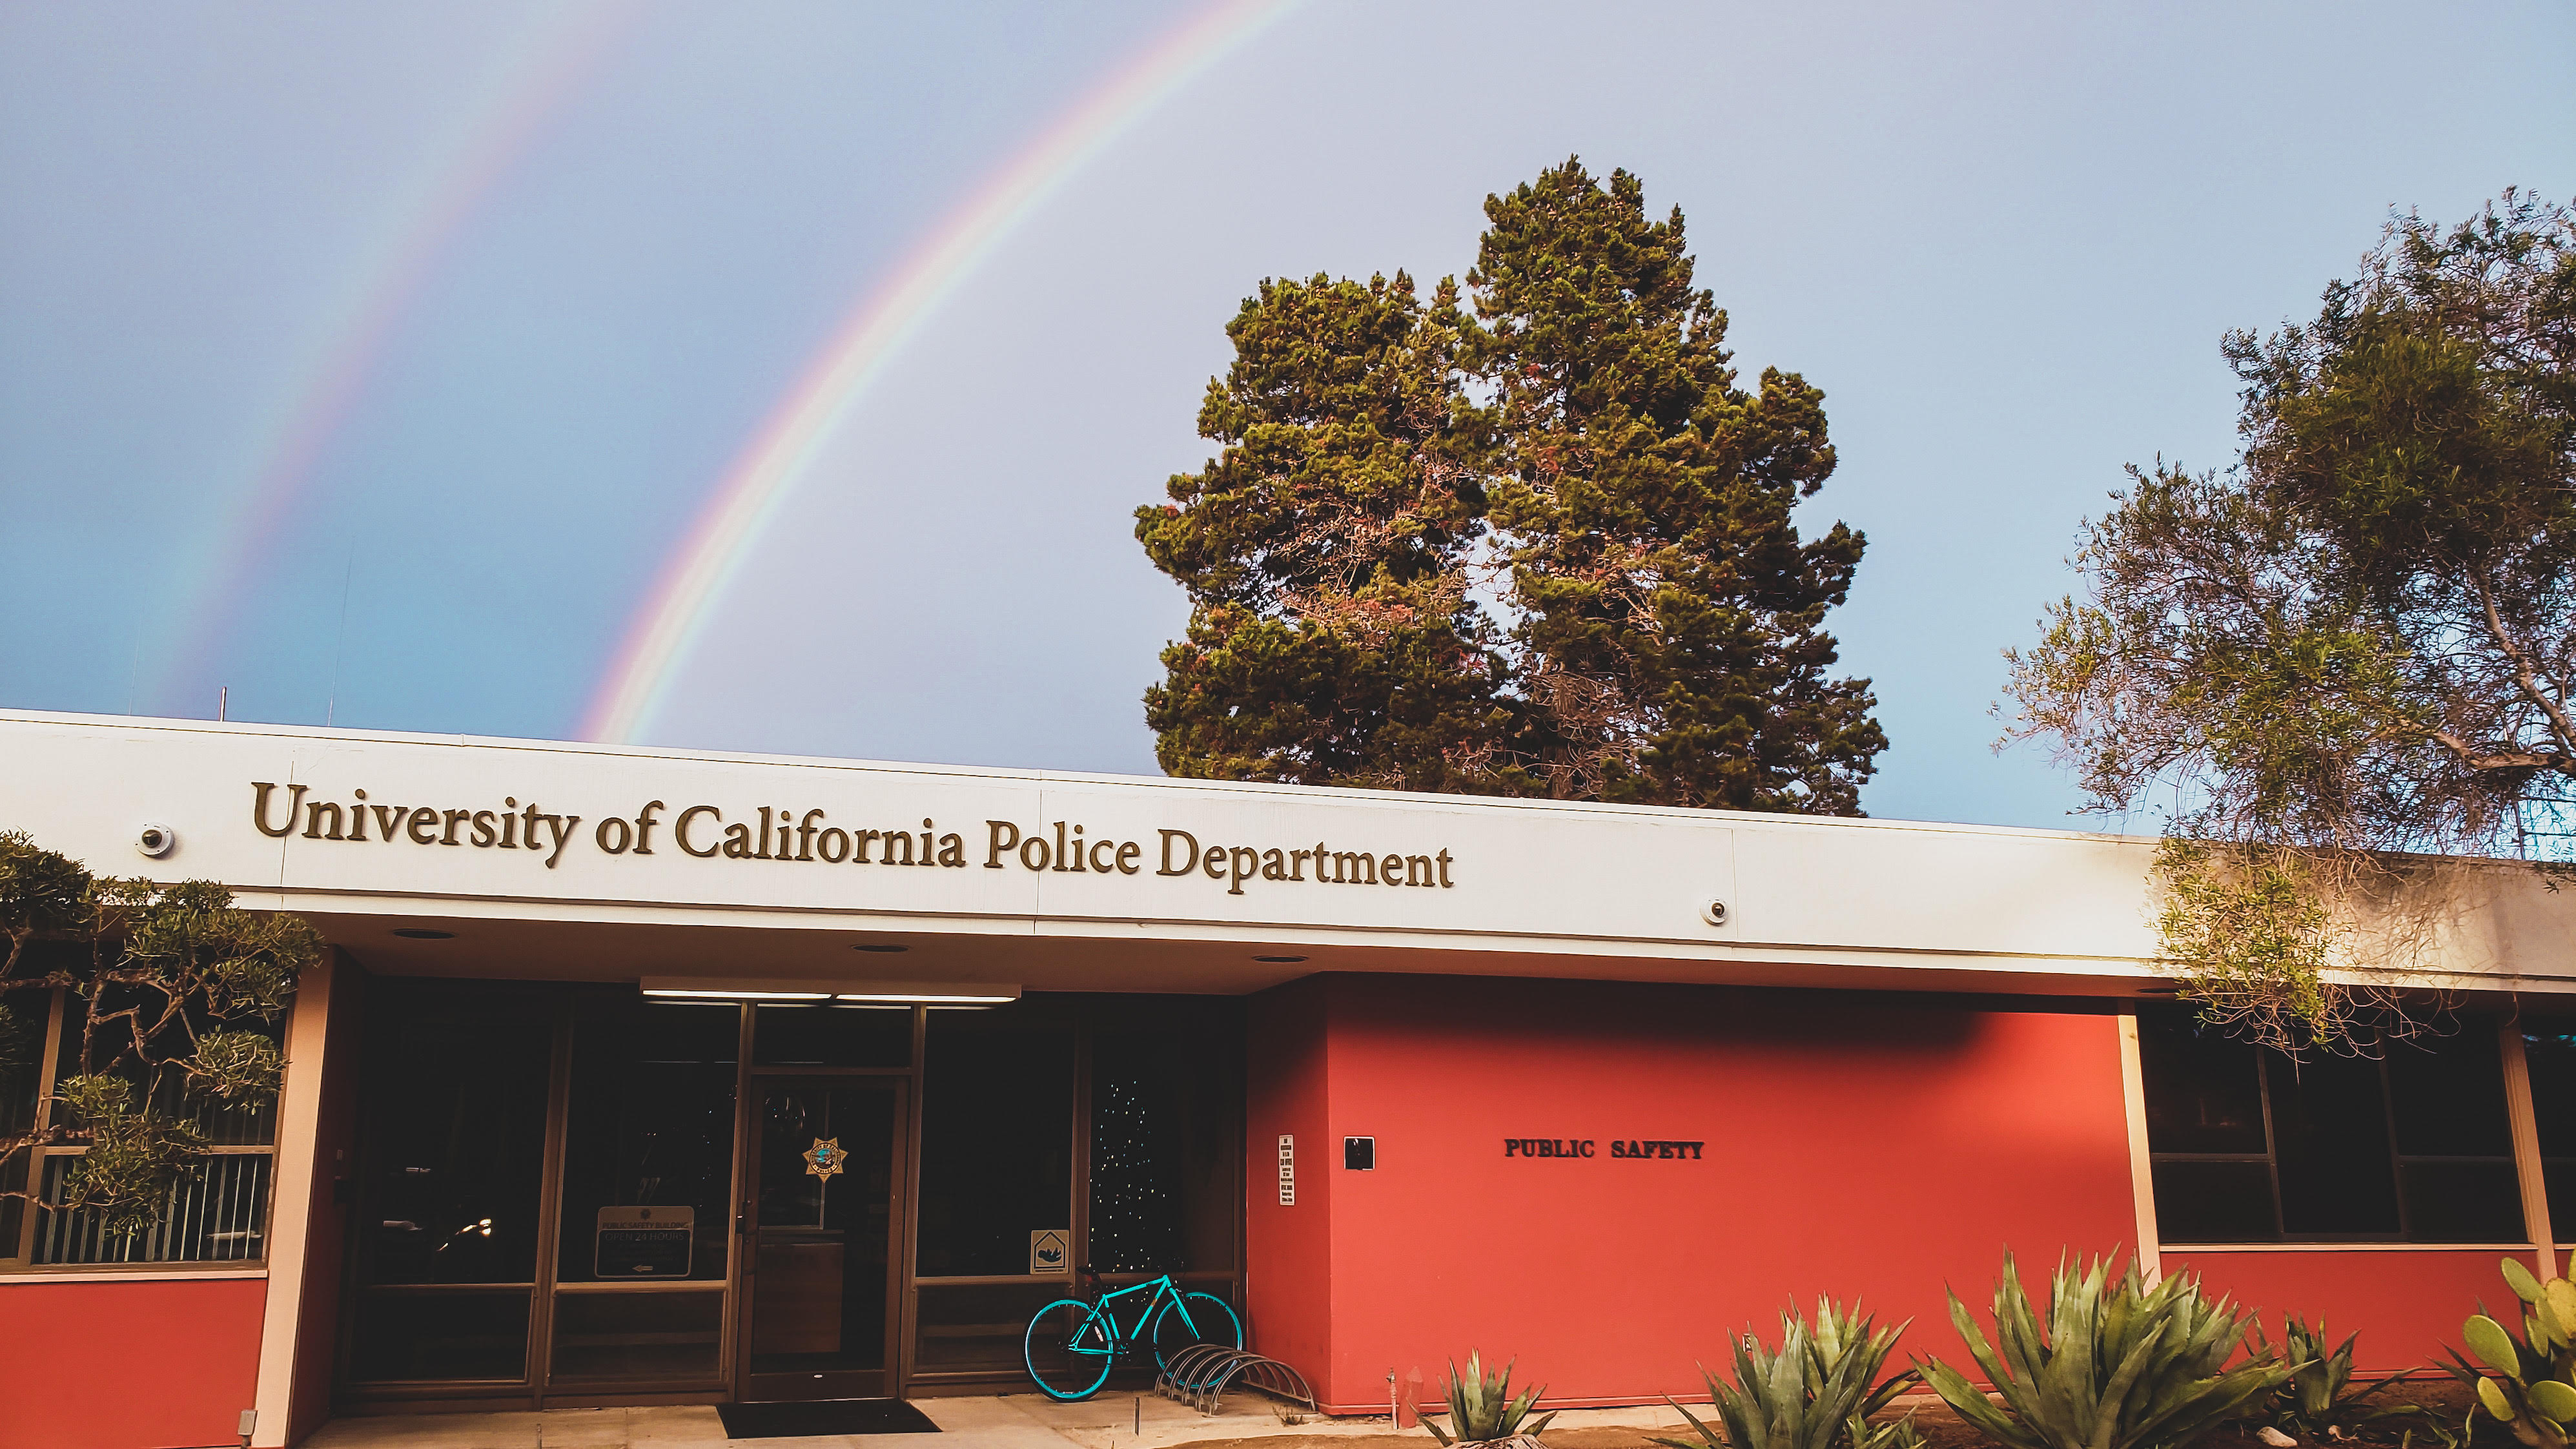 UCSB Police Station with rainbow in background 